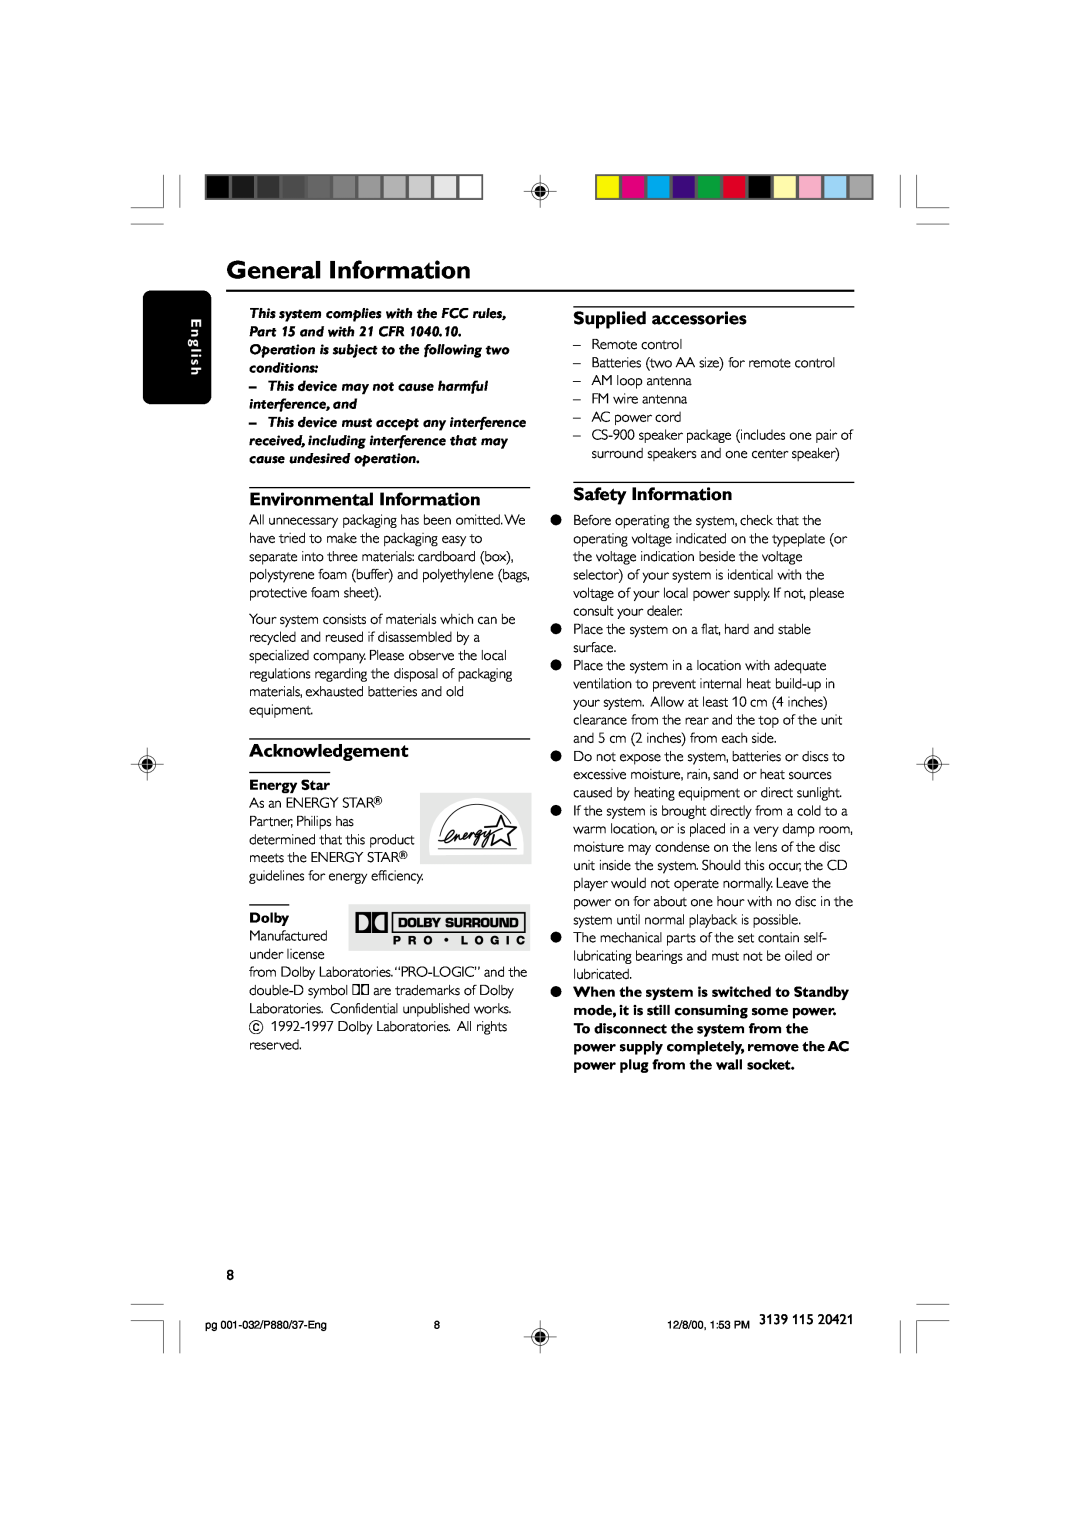 Philips P880 manual General Information, E n g l i s h, This device may not cause harmful interference, and, Energy Star 